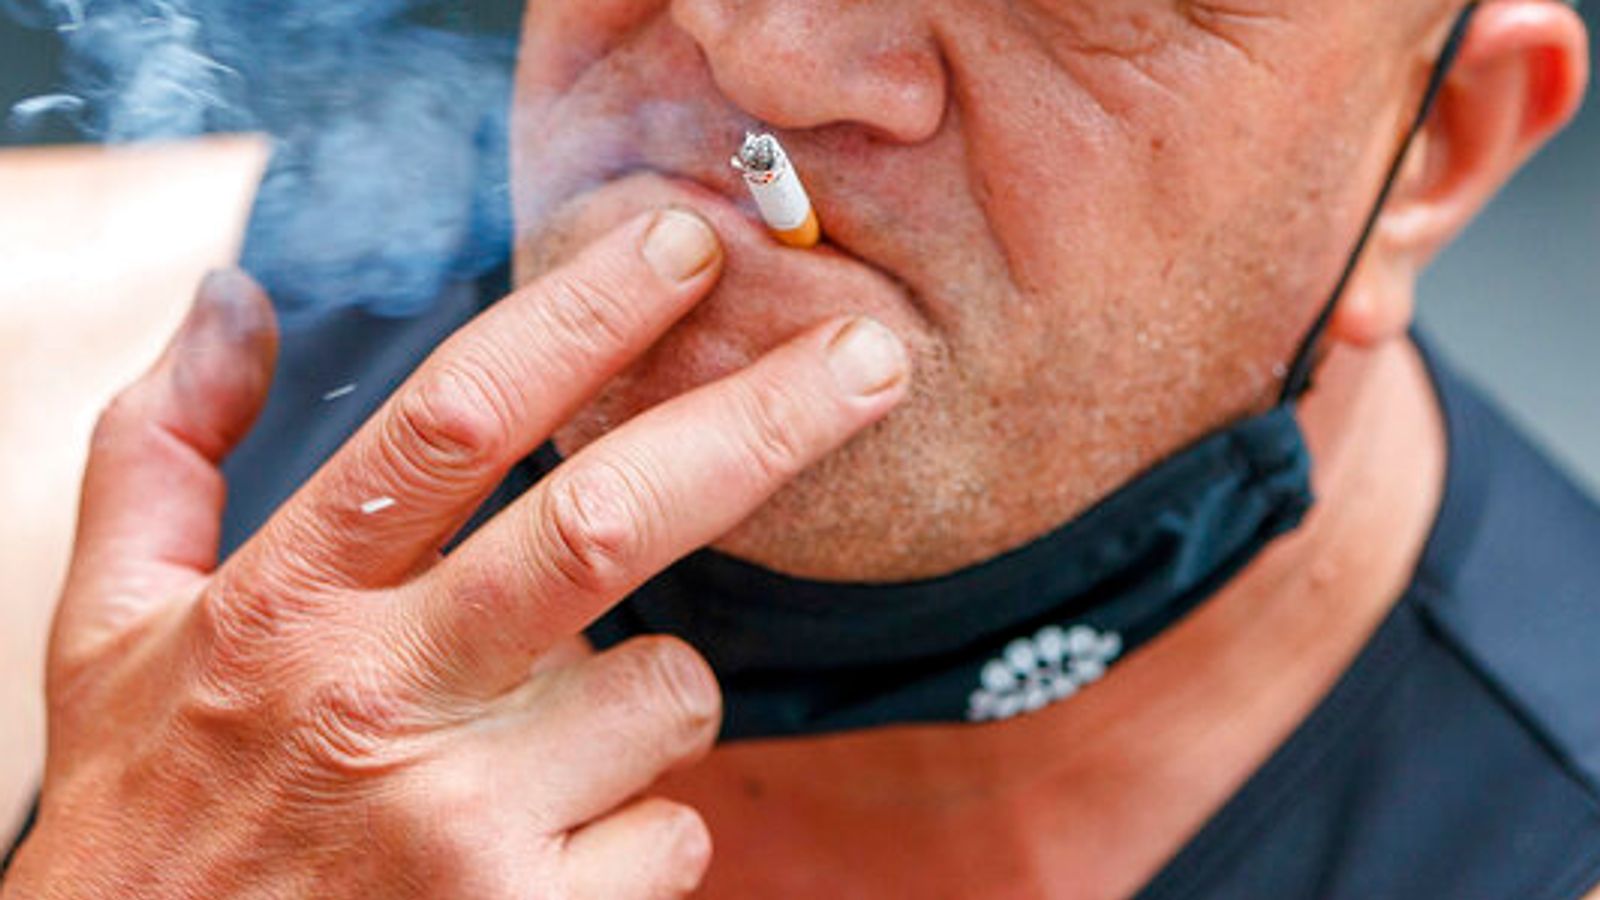 Future generations banned from ever being able to buy tobacco in New Zealand